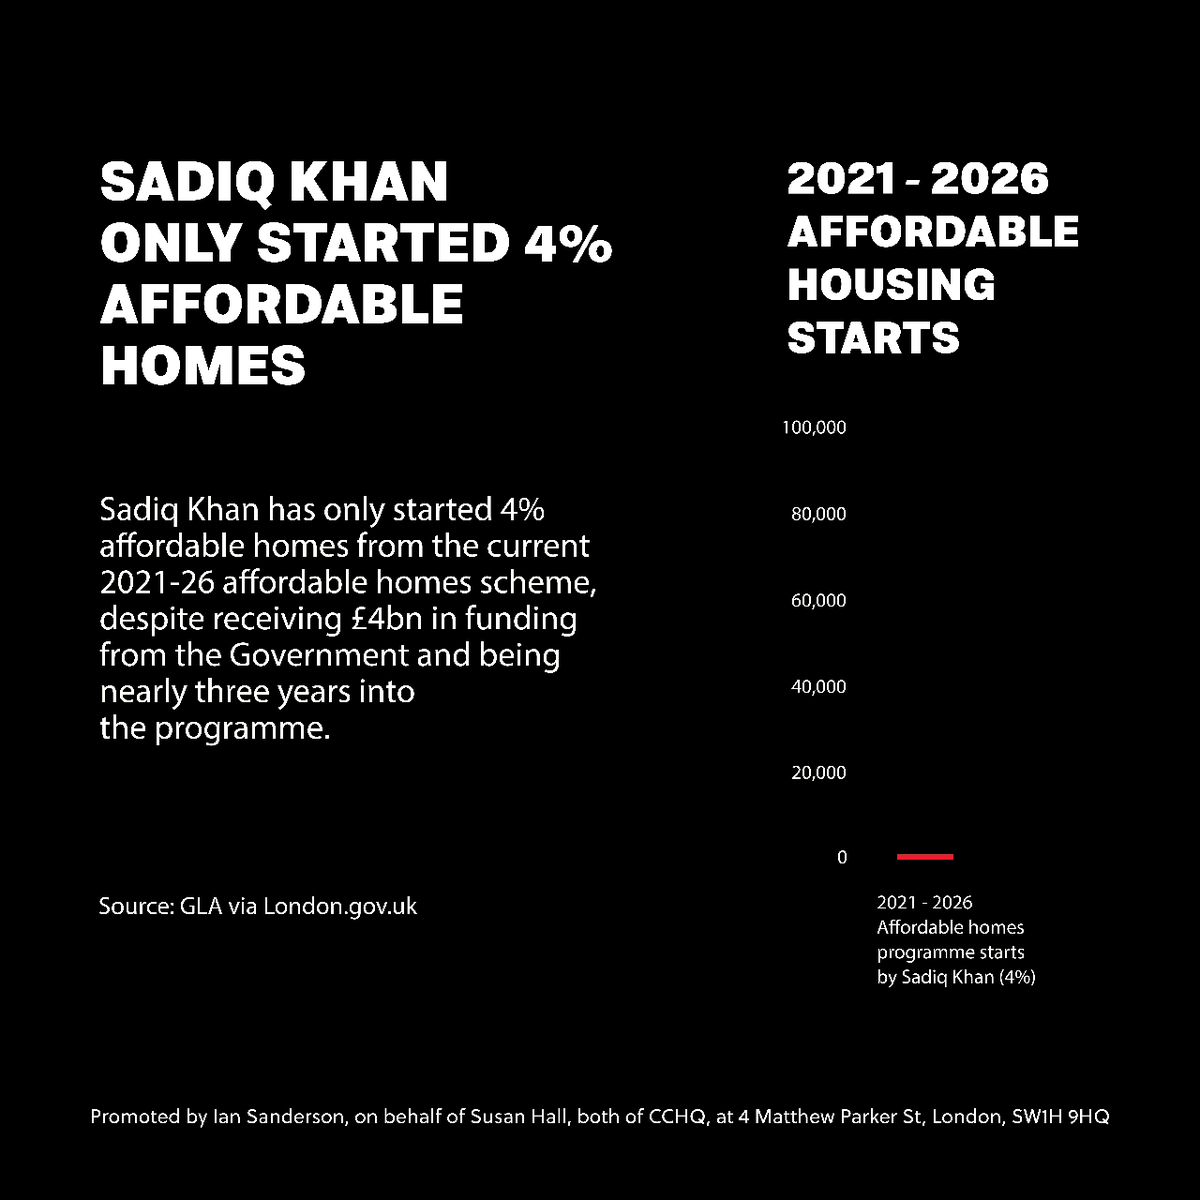 Sadiq Khan has only started 4% of the houses from his 2021-26 programme, despite being nearly 3 years into the scheme.  This is unacceptable. As Mayor I will actually build the family homes that people can afford.